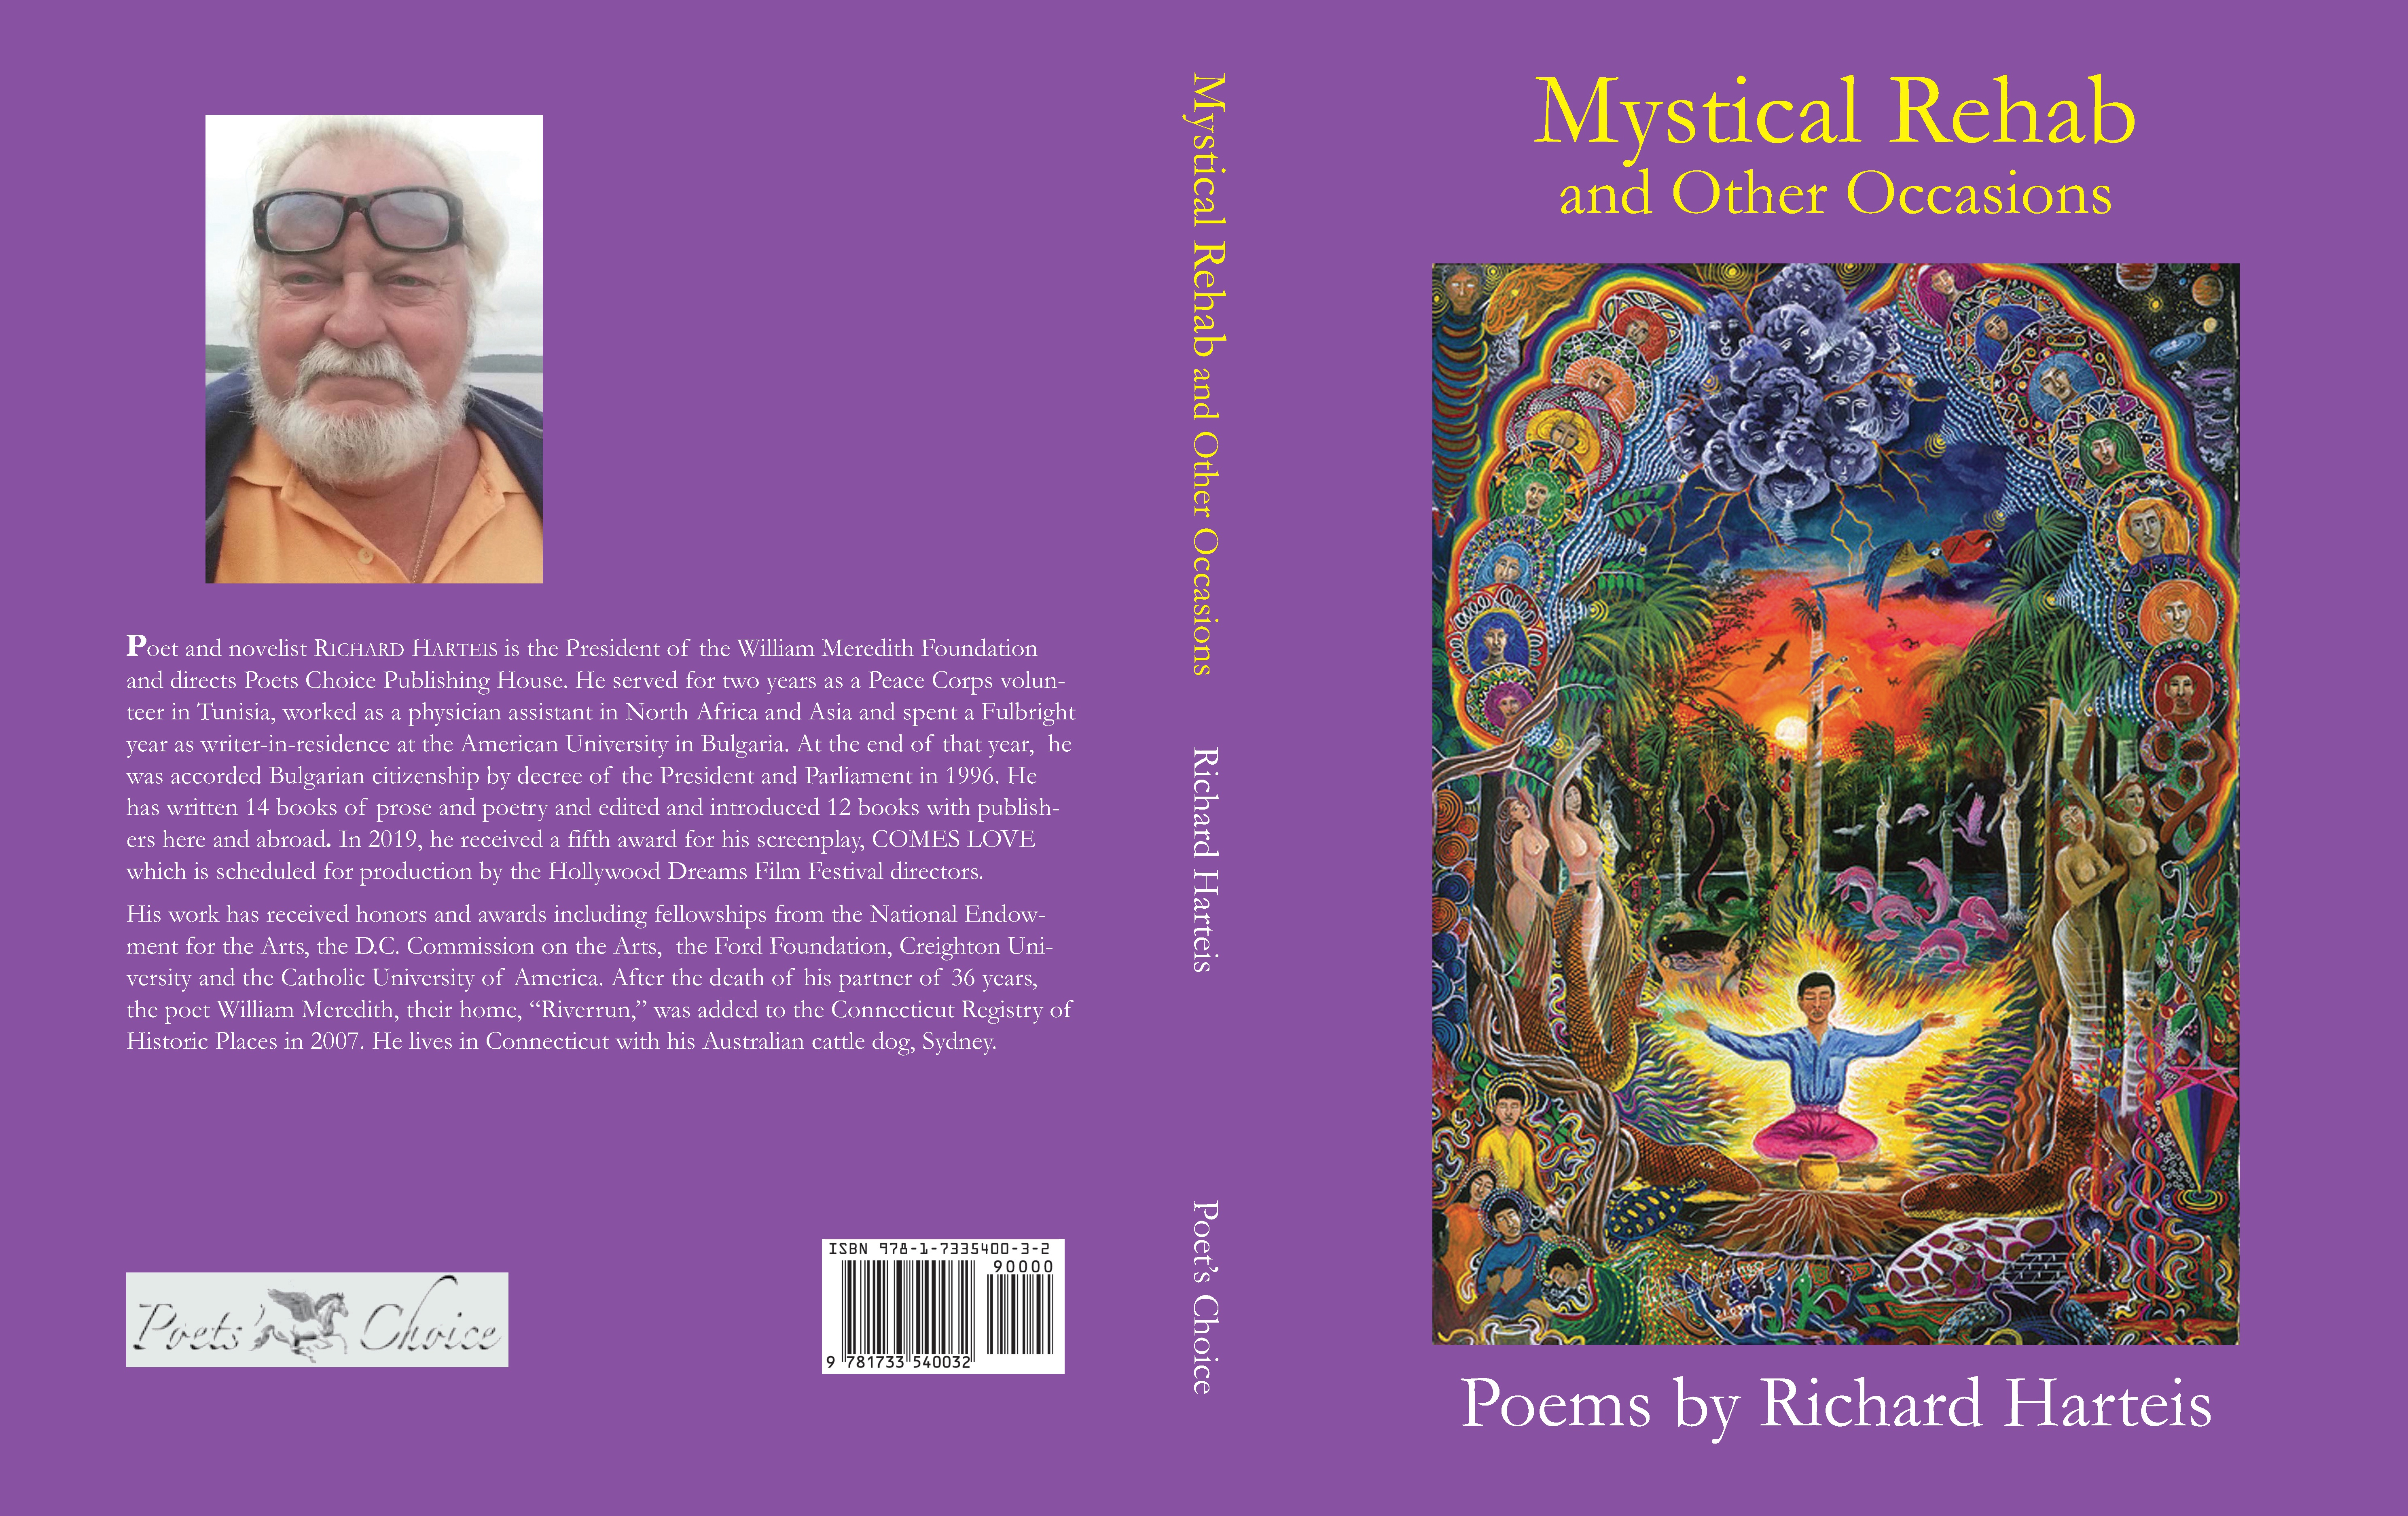 Poets Choice Publishes "Mystical Rehab and Other Occasions"